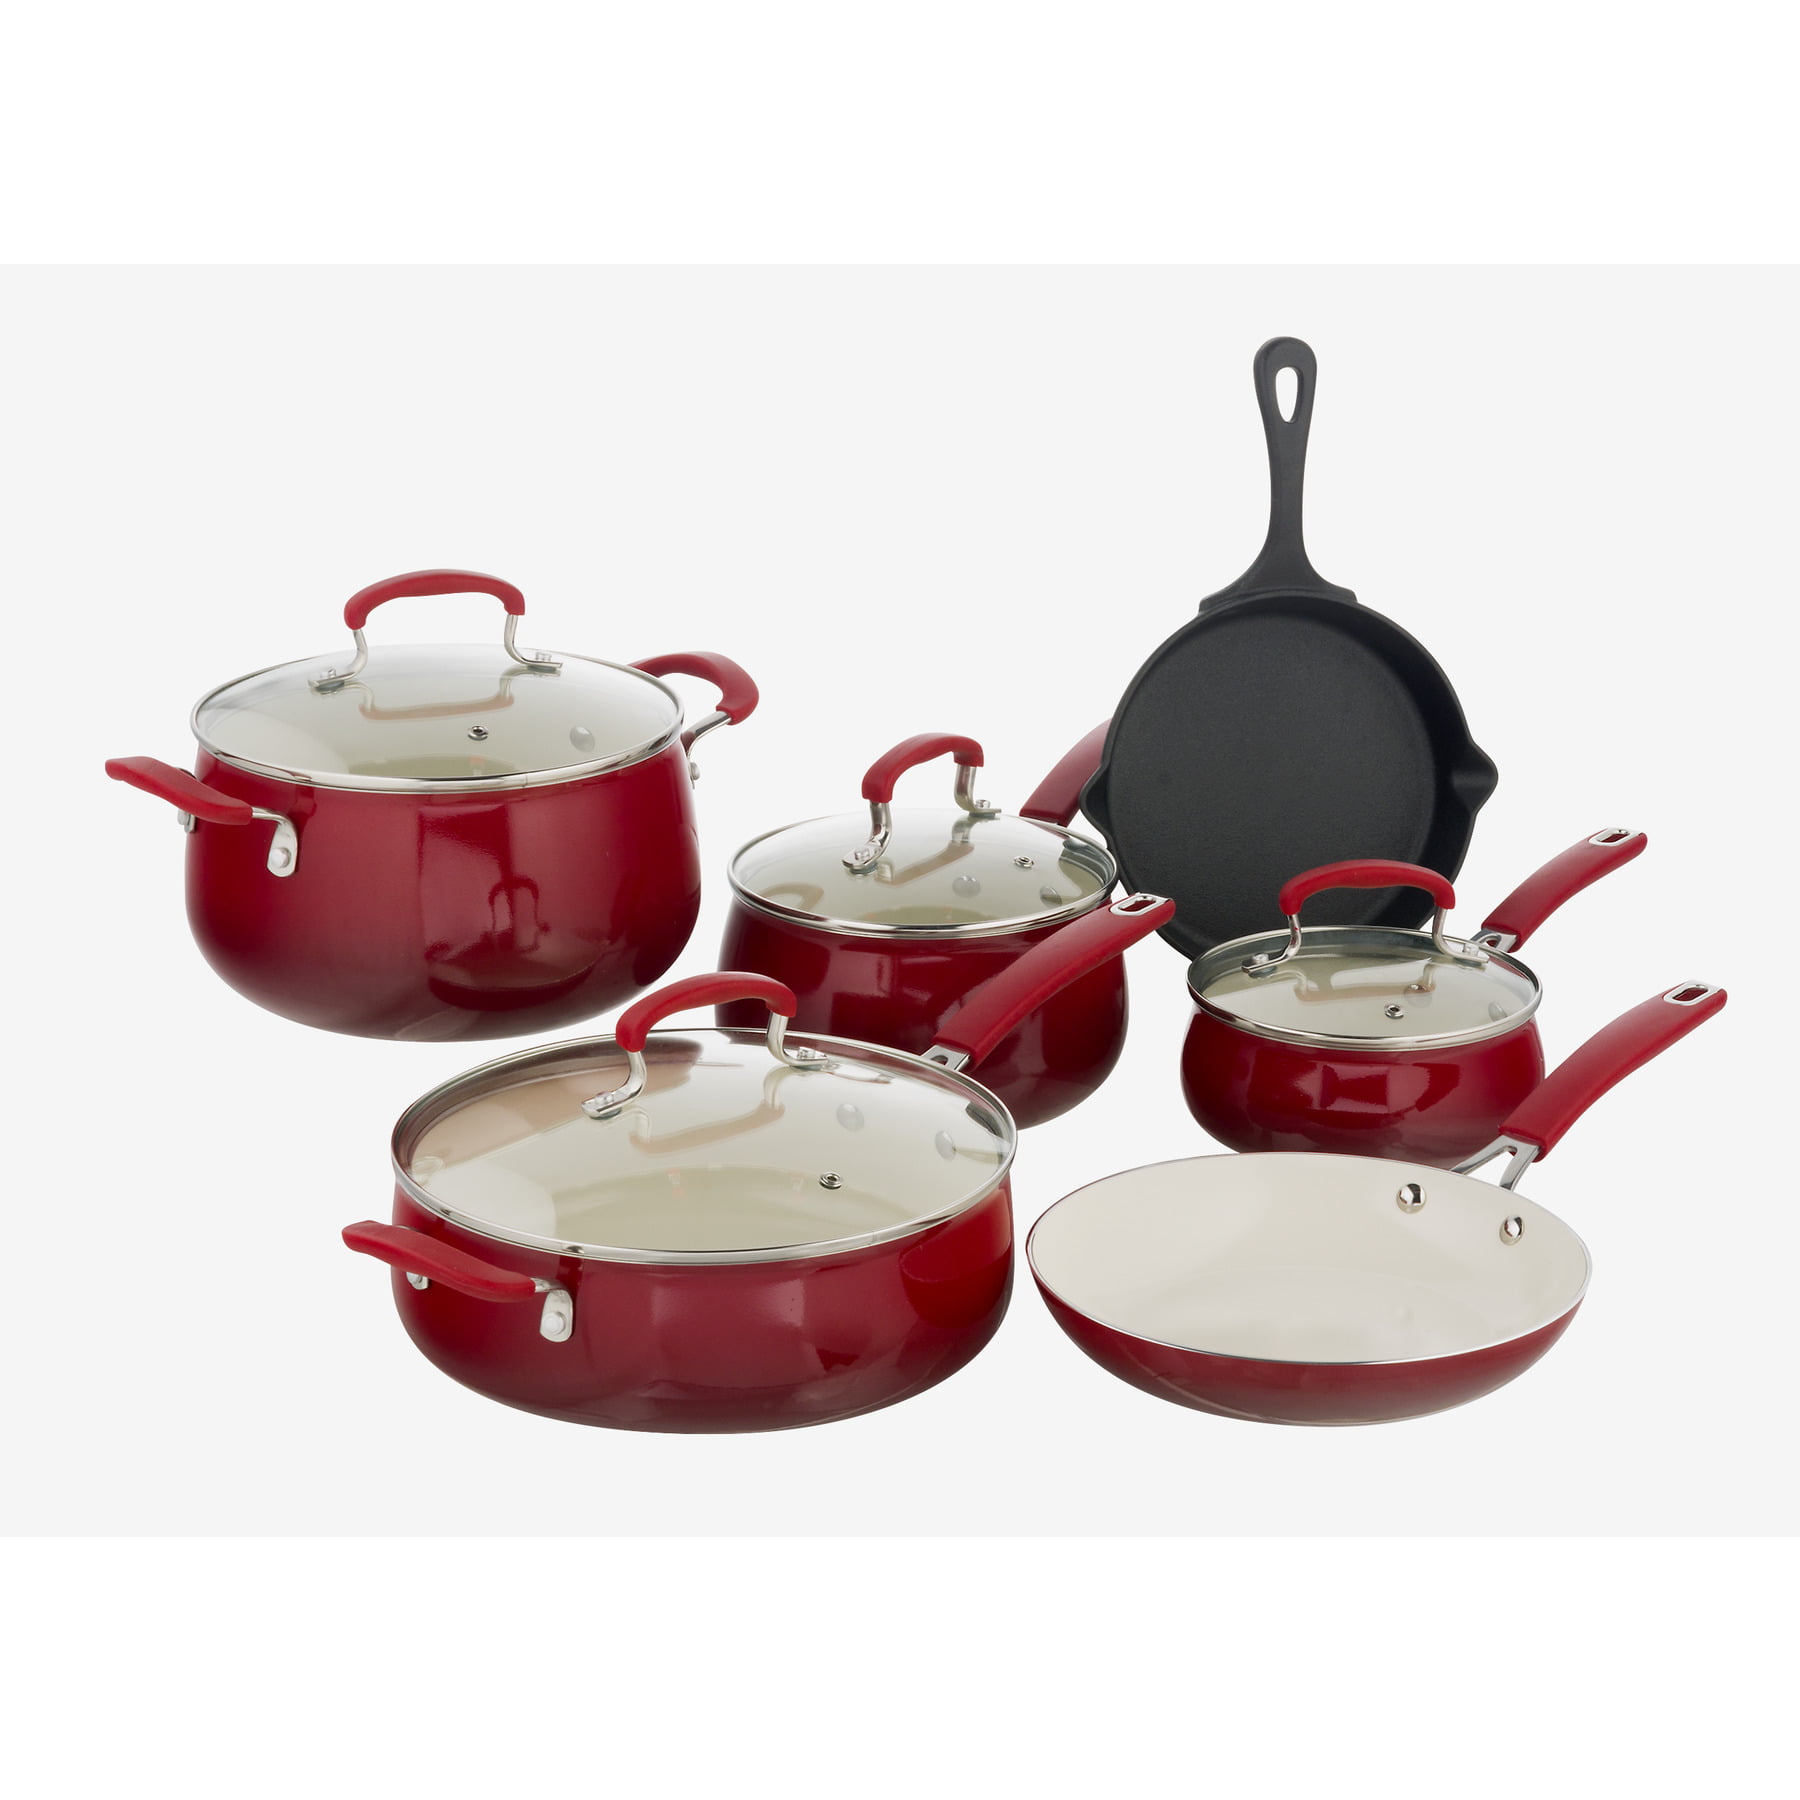 PIONEER WOMAN Classic Belly 10 Piece Ceramic Non-stick & Cast Iron Cookware  Set